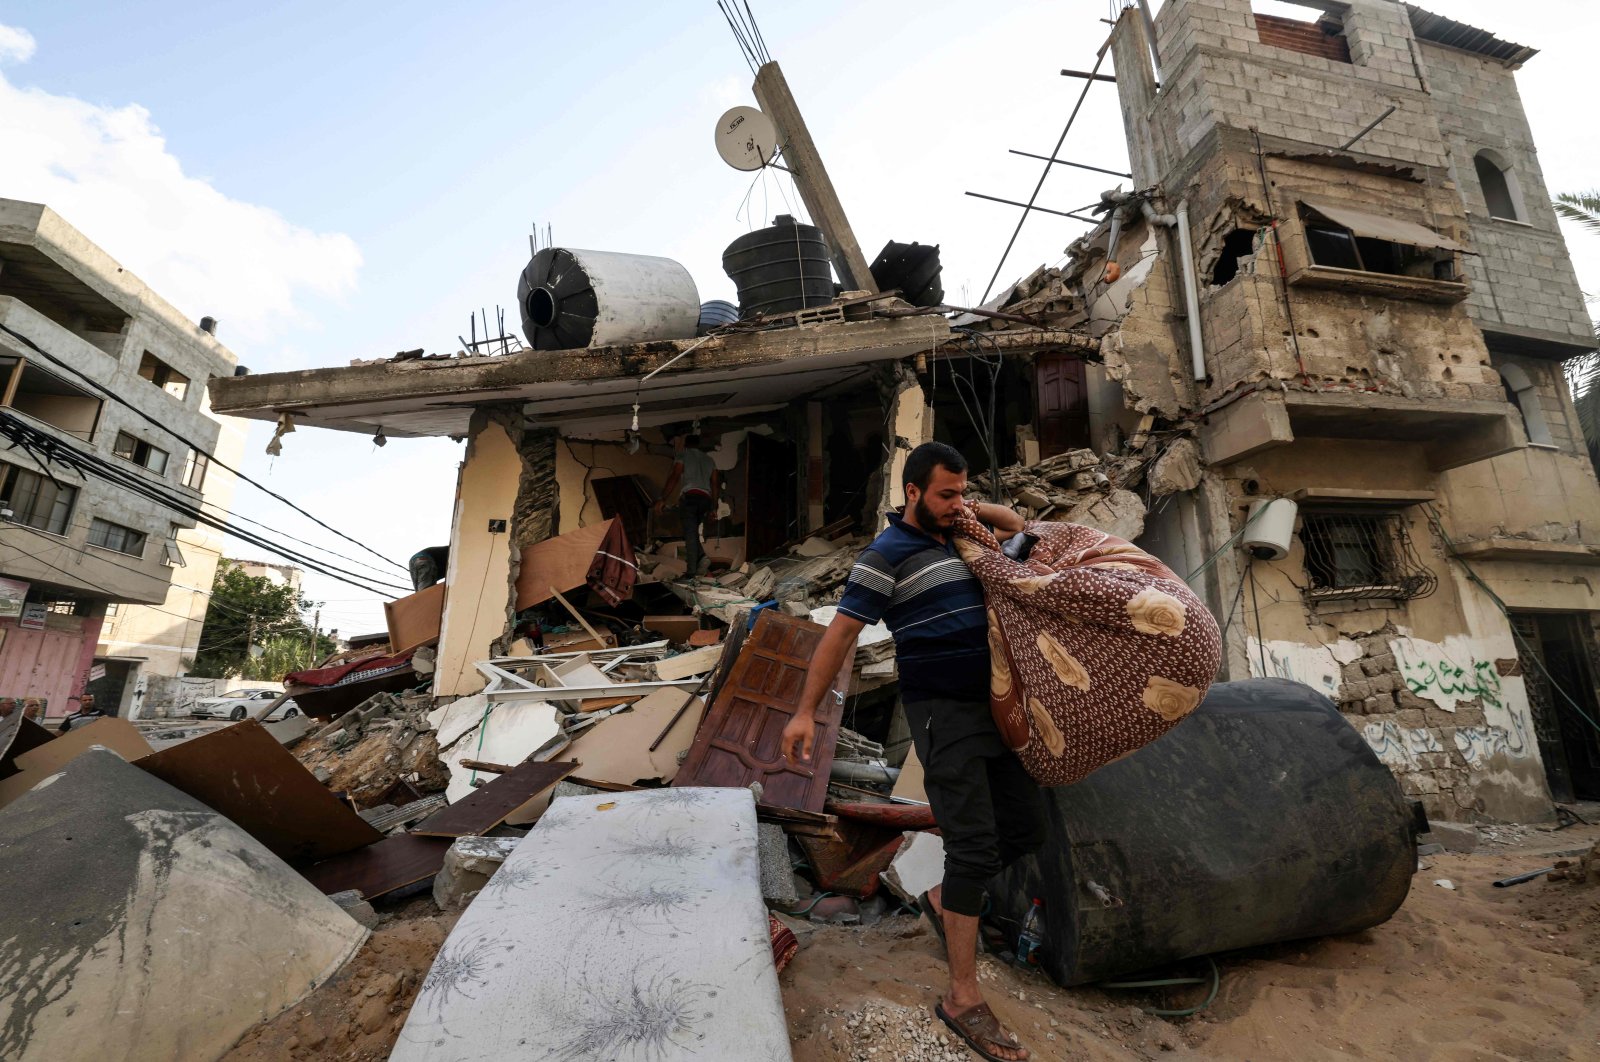 Palestinians salvage belongings from the rubble of their home, following Israeli airstrikes in Gaza City, on Aug. 7, 2022. (AFP Photo)